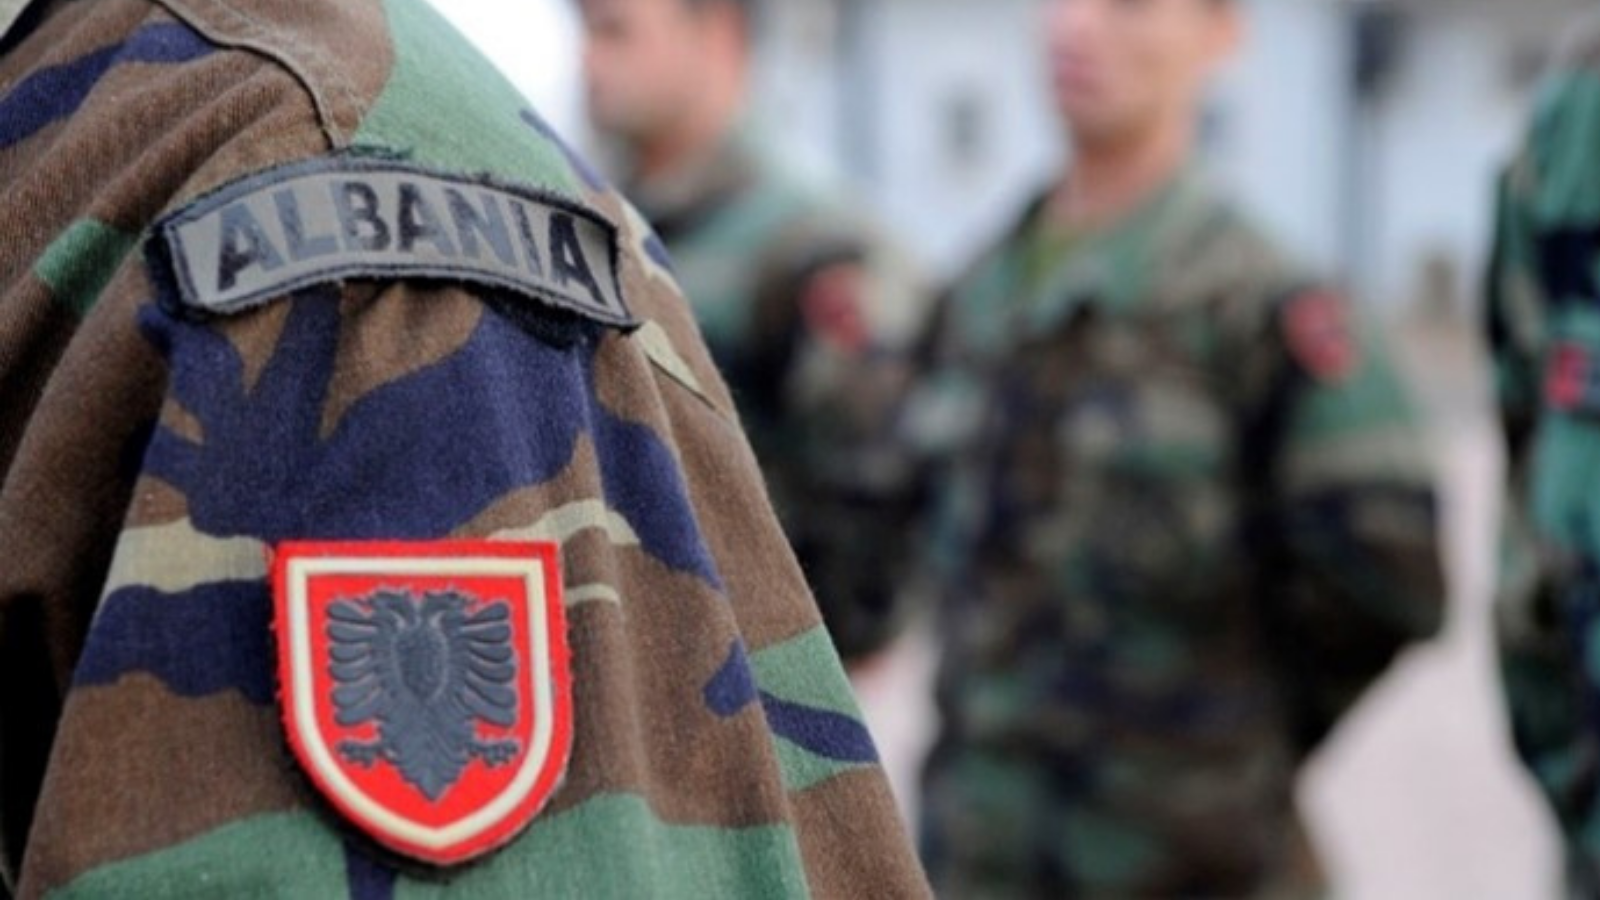 Albanian Armed Forces personnel stand at attention. (Photo courtesy of Creative Commons)